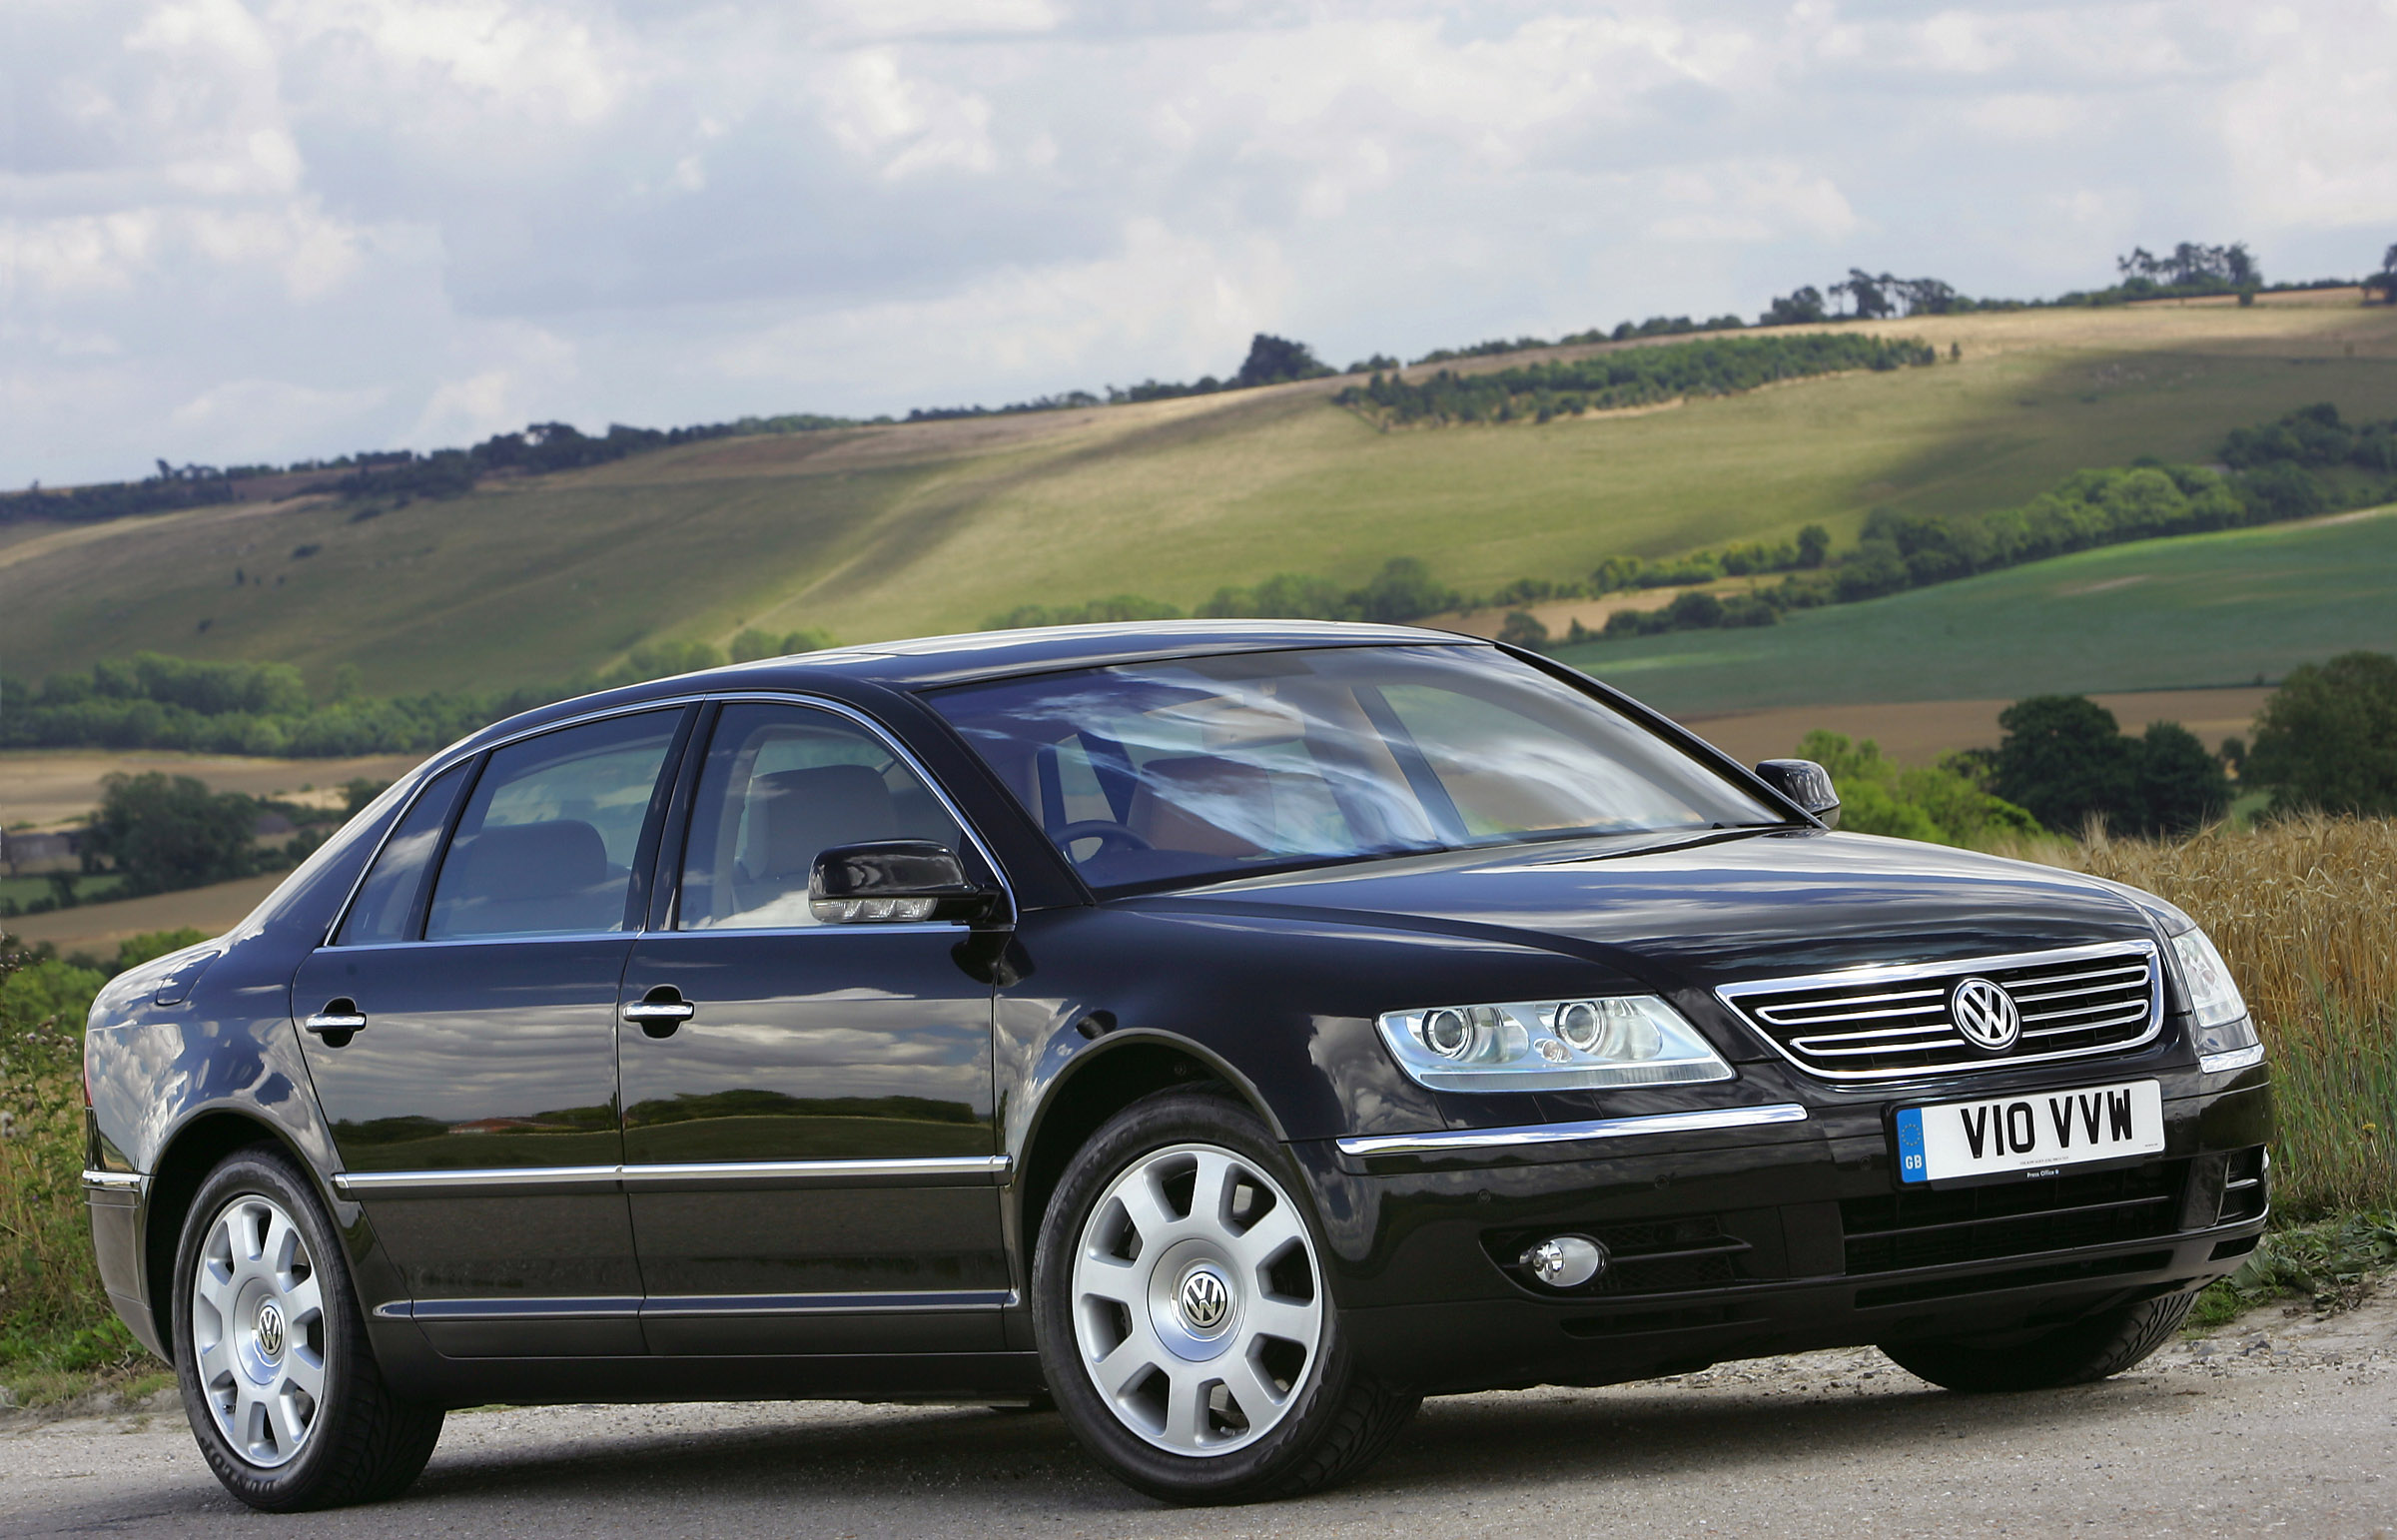 Modern Collectibles Revealed: 2005 Volkswagen Phaeton W12 - The